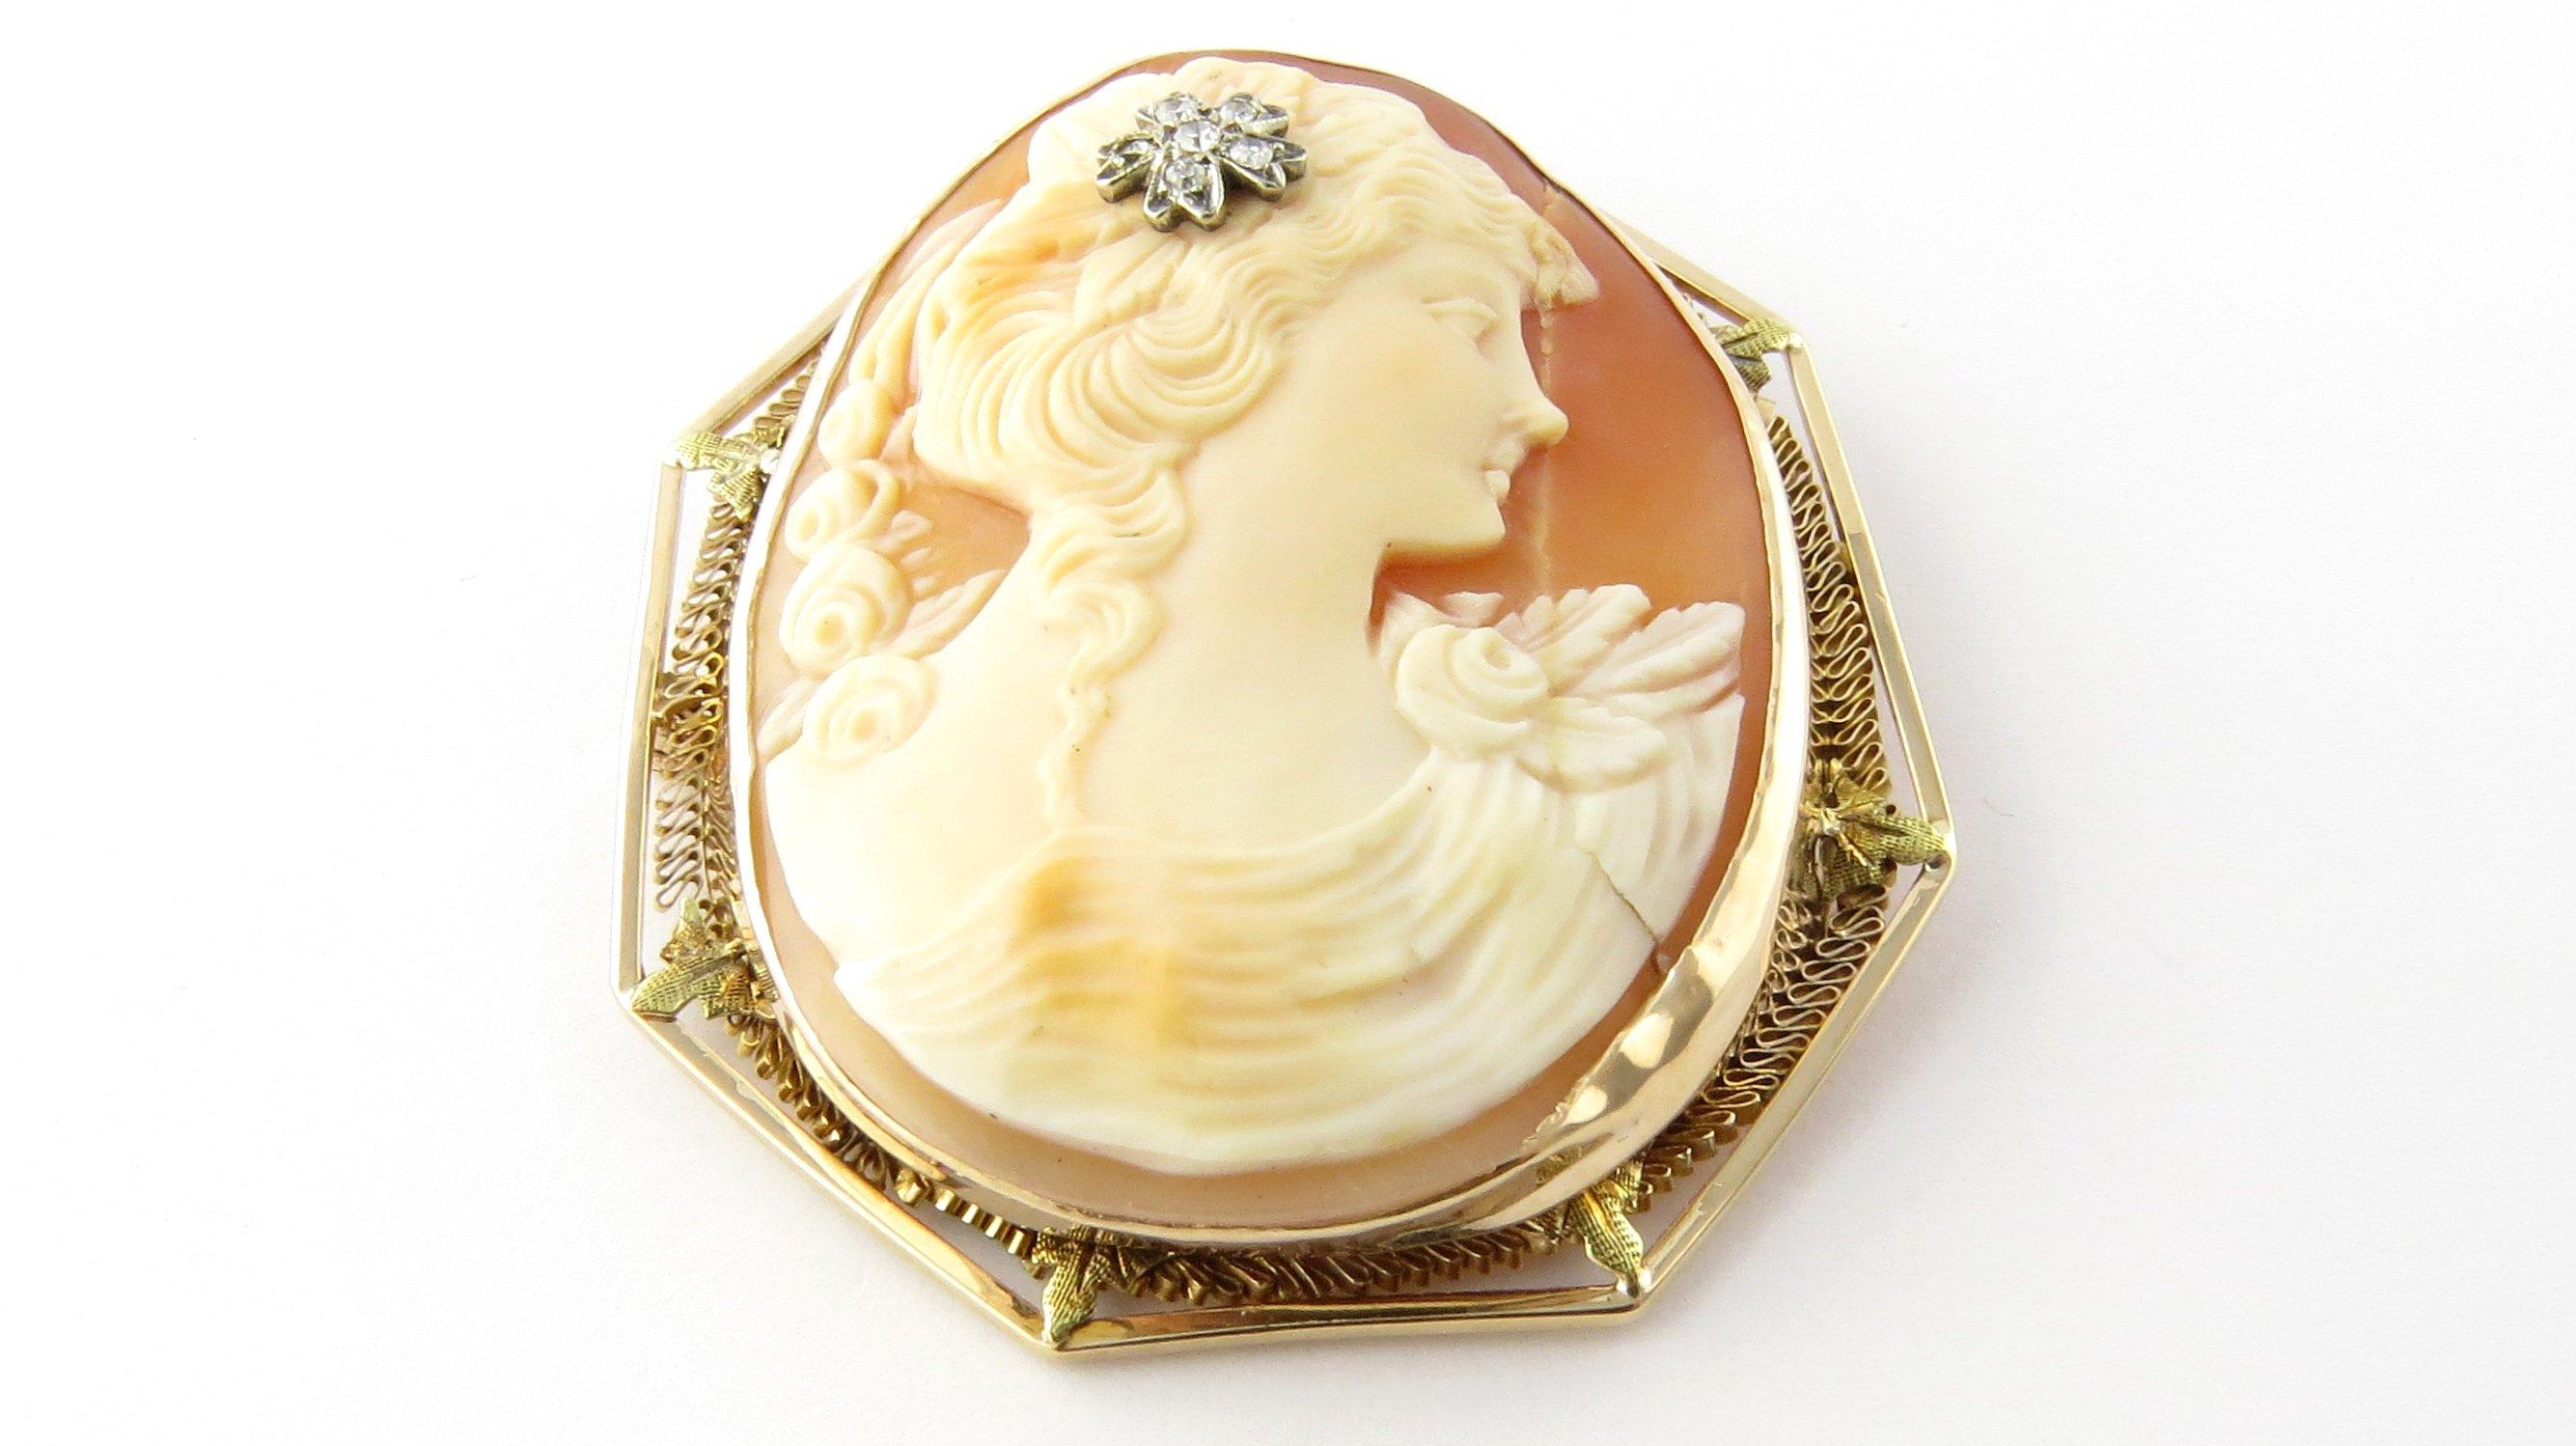 Vintage 14 Karat Yellow Gold and Diamond Cameo Brooch/Pendant-

This stunning cameo features a lovely lady in profile adorned with five single cut diamonds and one rose cut diamond in her hair. Framed in delicate 14K yellow gold filigree. Can be